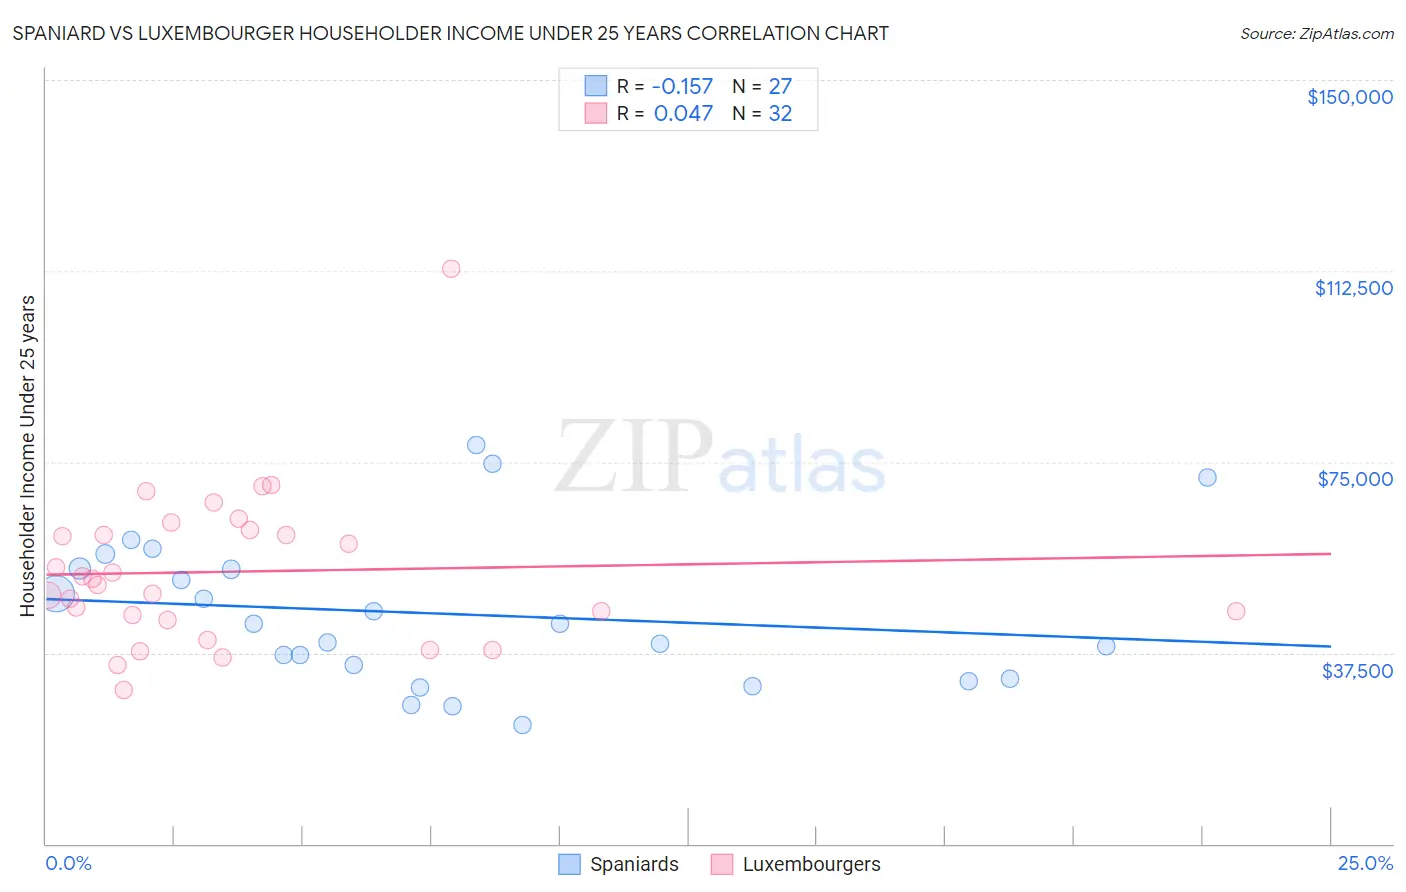 Spaniard vs Luxembourger Householder Income Under 25 years